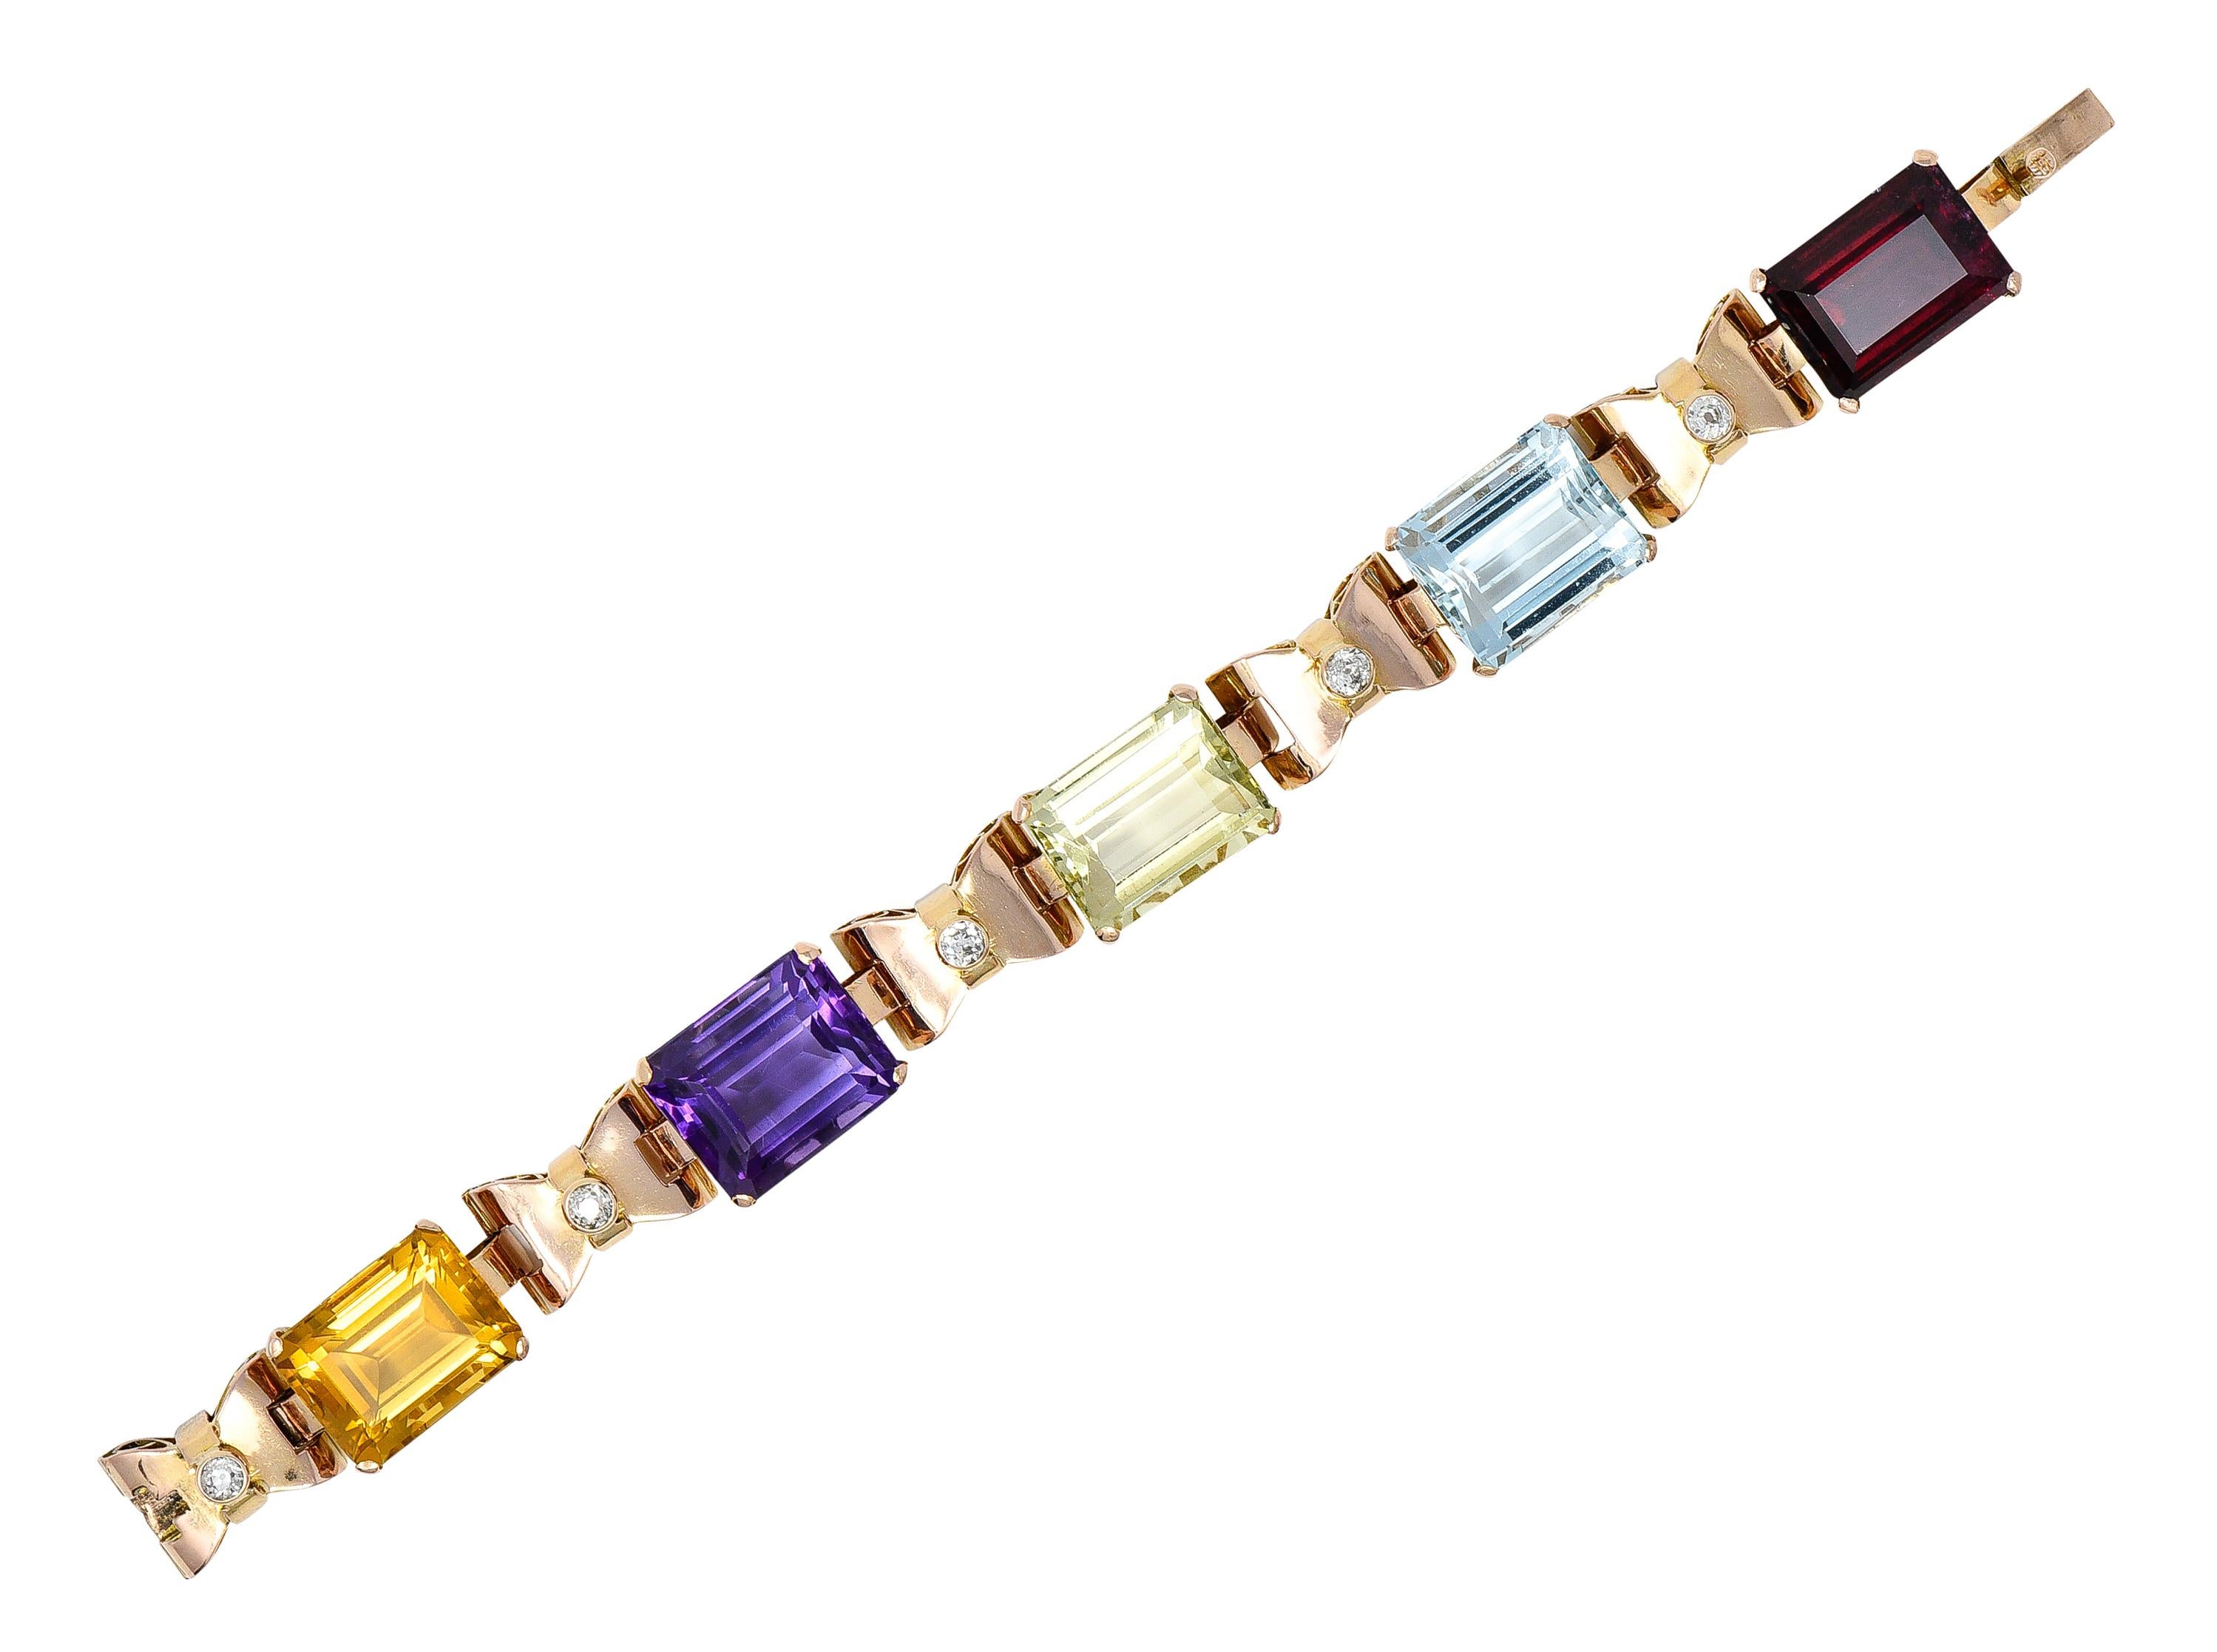 Comprised of alternating hinged basket and bow links with pierced scroll motif profile. Basket links feature emerald cut amethyst, aquamarine, citrine, and tourmaline. Transparent light/medium purple, blue, orangey brown, green, and pinkish red in